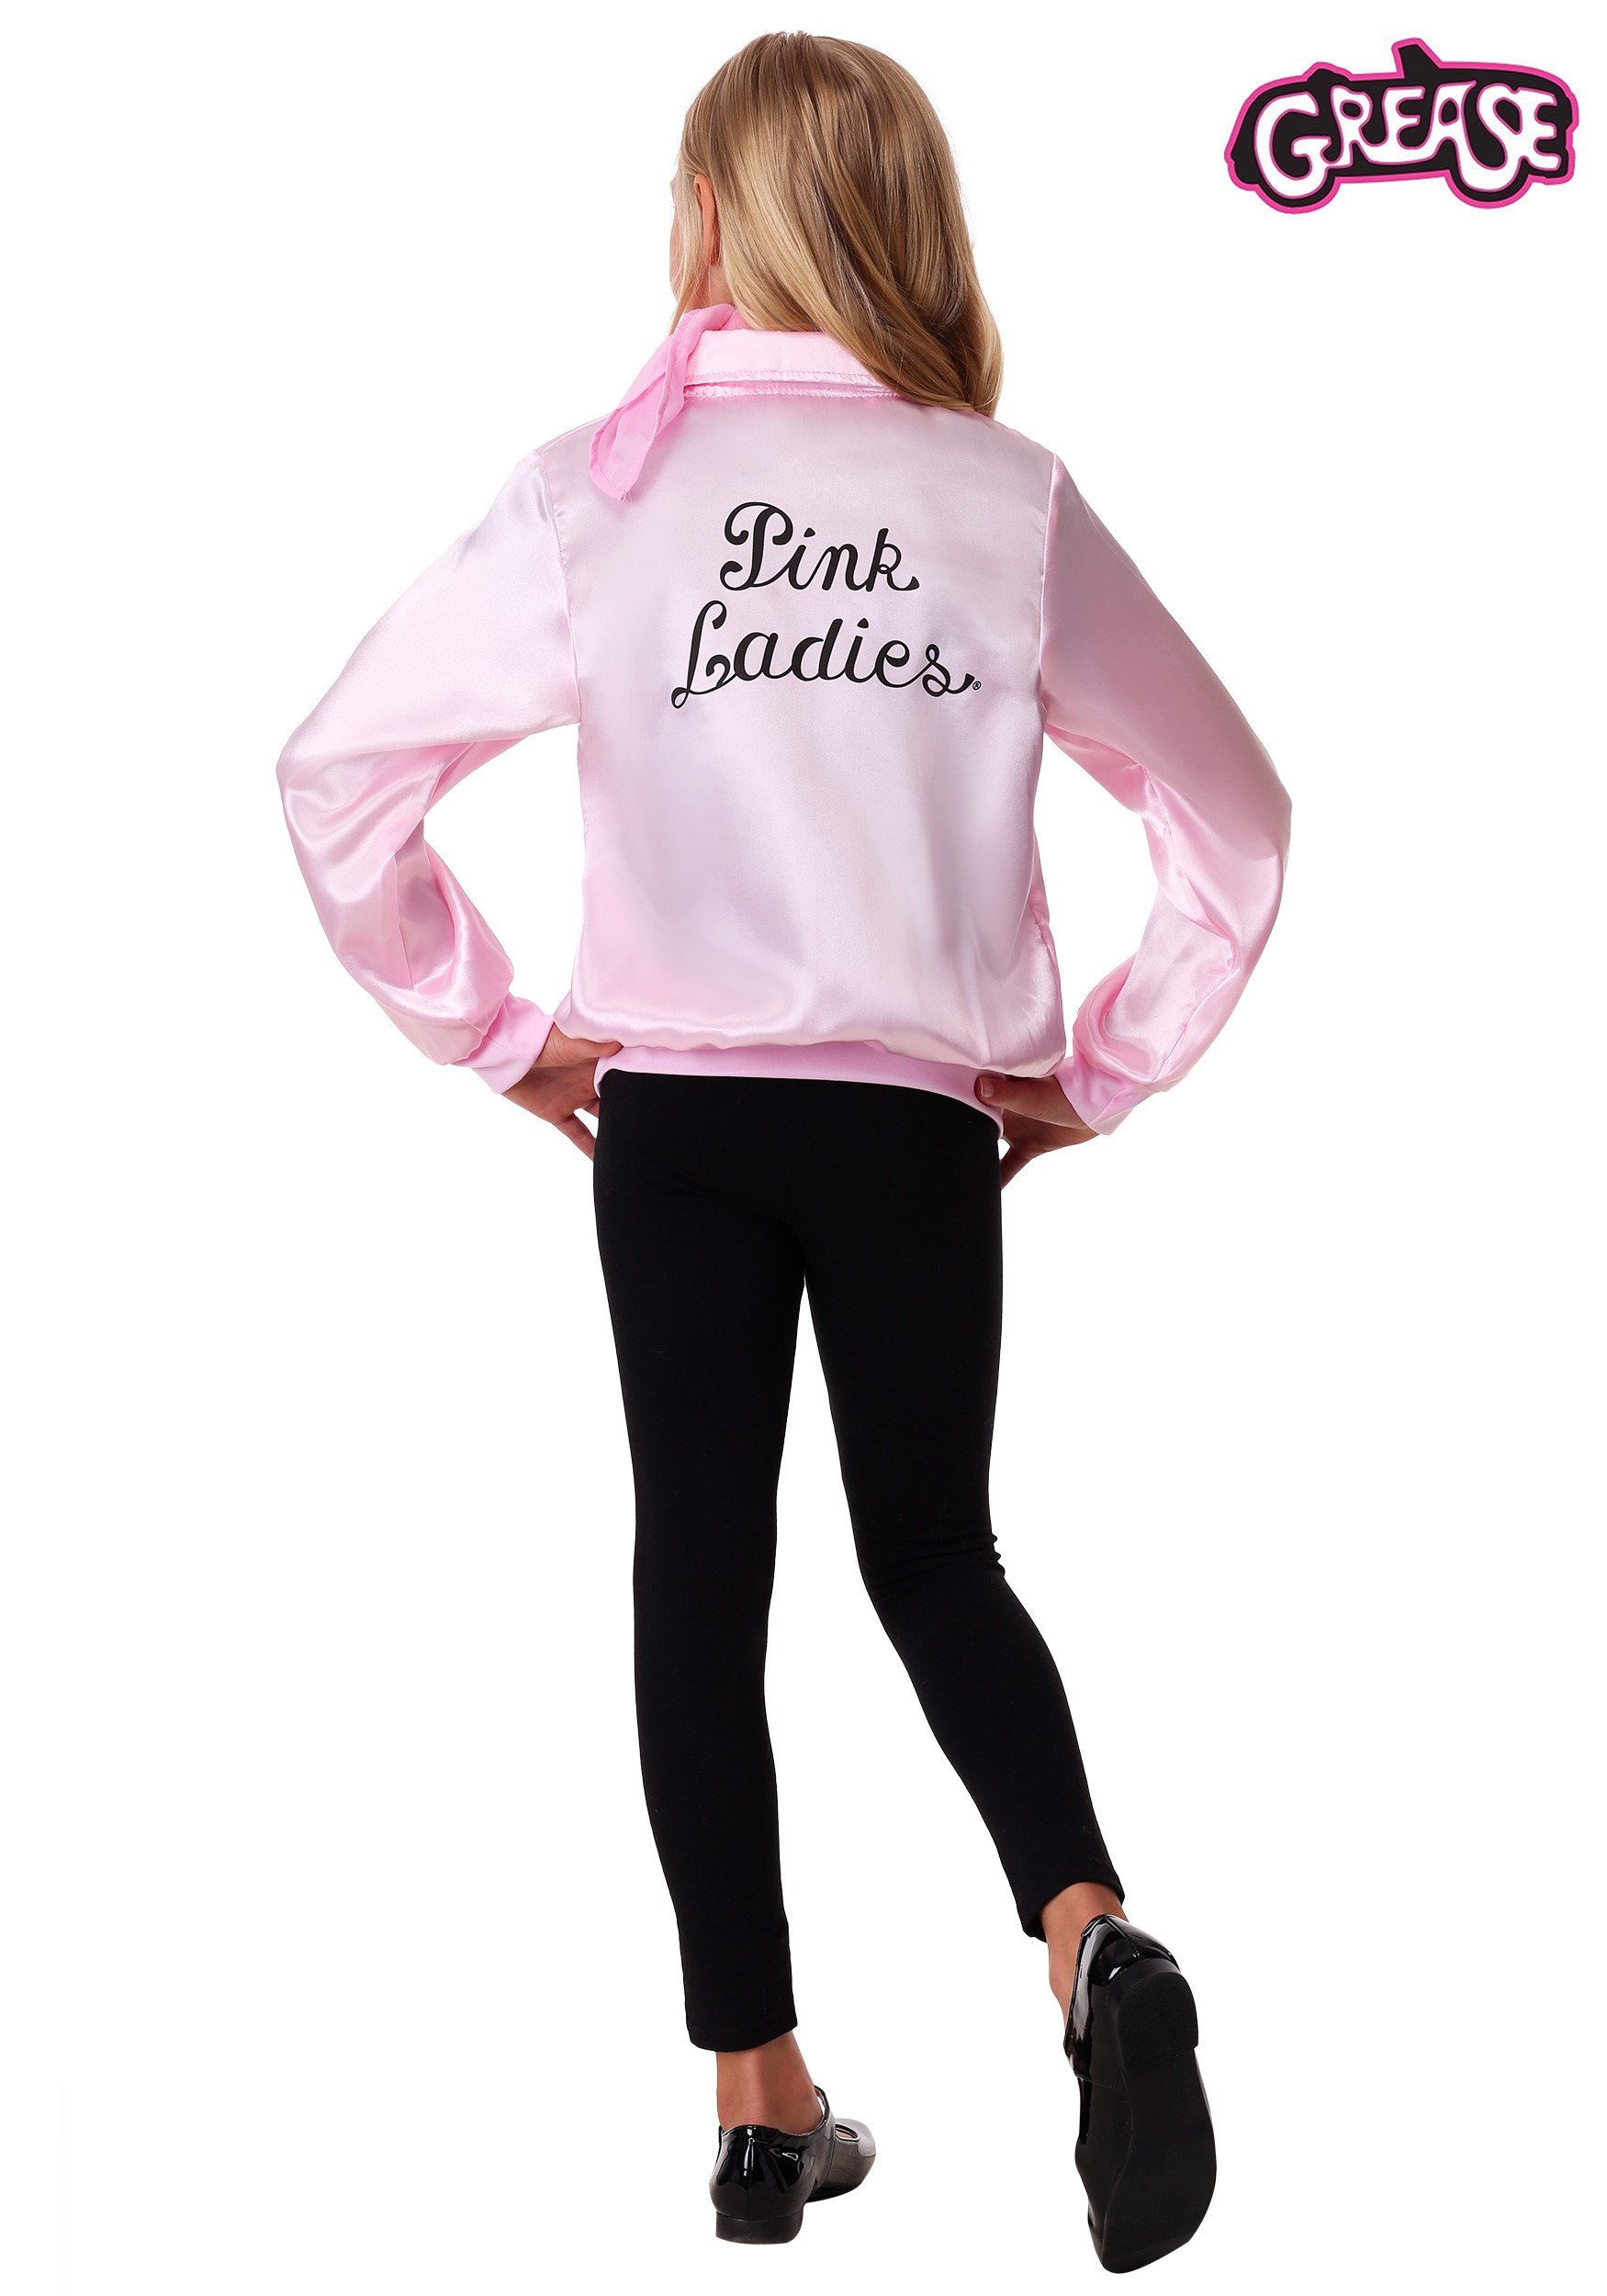 Movie Grease Costume Cosplay Pink Lady Jacket Outfit donna bambini ragazze  Halloween gioco di ruolo vestiti